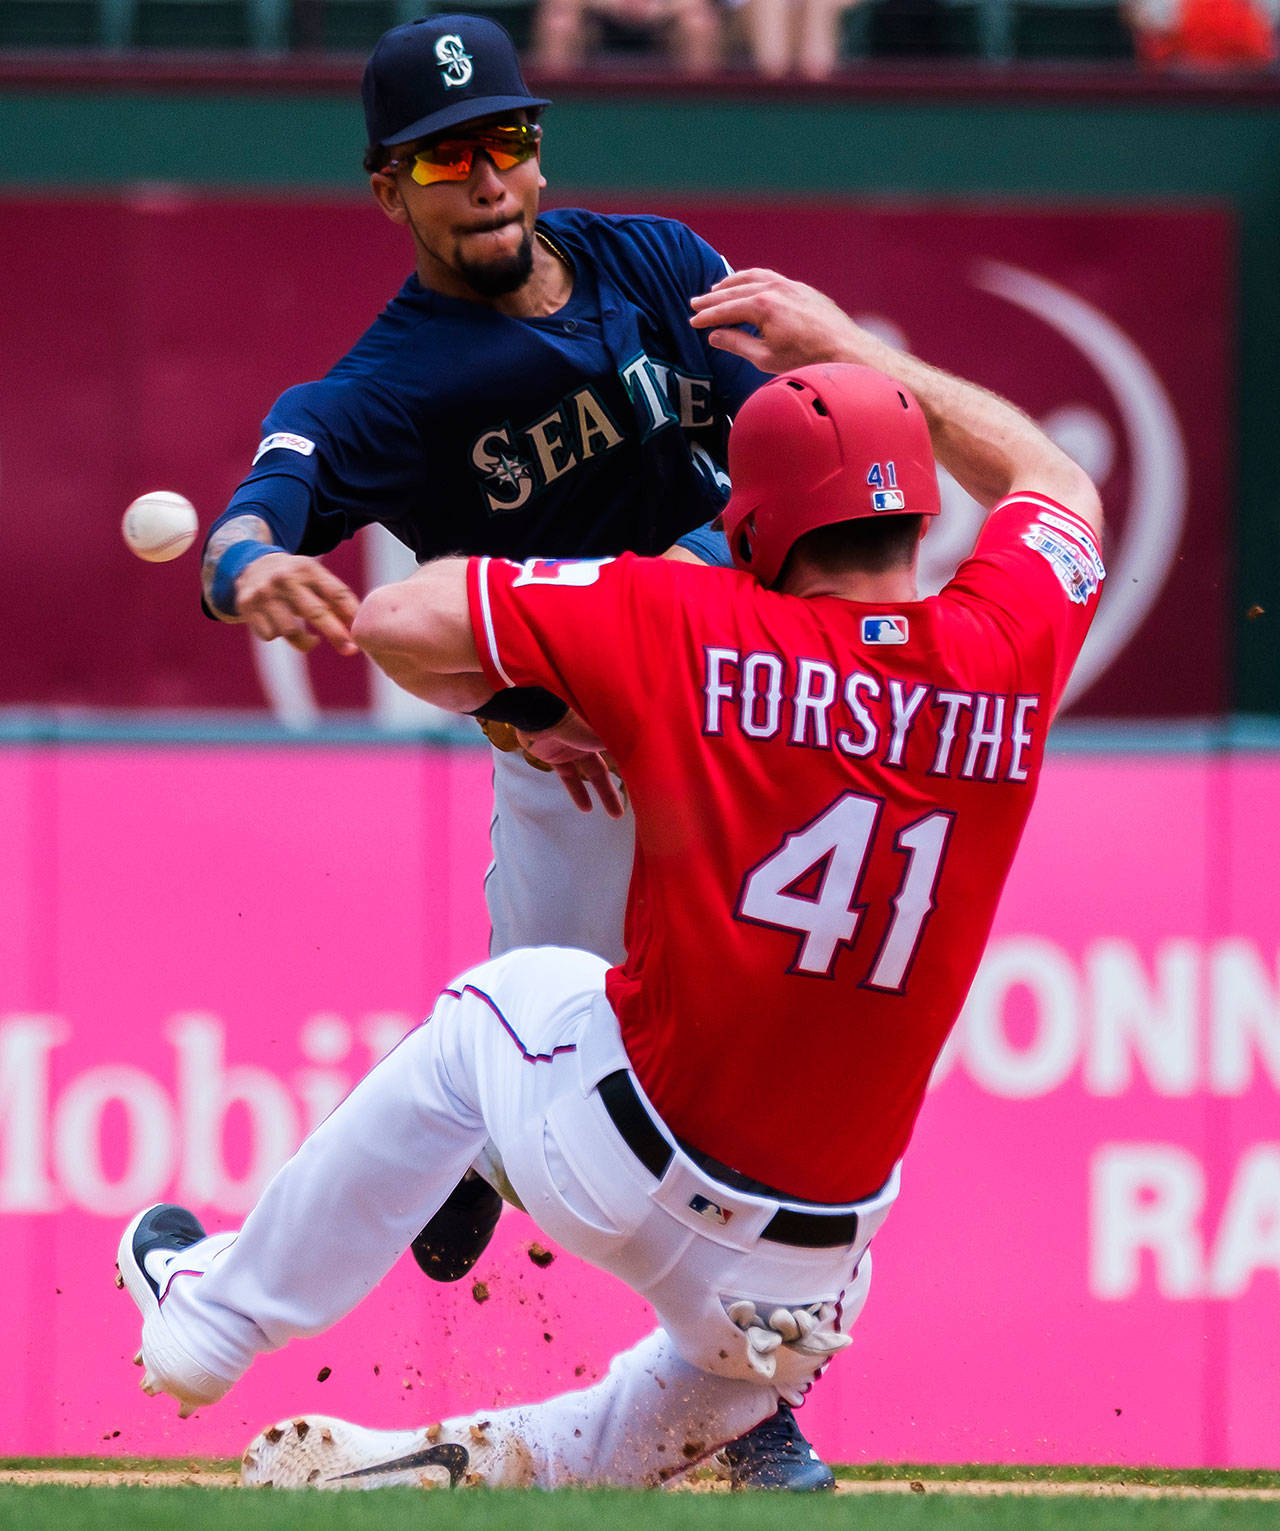 Seattle Mariners shortstop J.P. Crawford makes the relay over the Texas Rangers’ Logan Forsythe (41) as he is forced out at second base on the front end of a double play during the fourth inning on Wednesday, May 22. (Smiley N. Pool | Dallas Morning News/TNS)